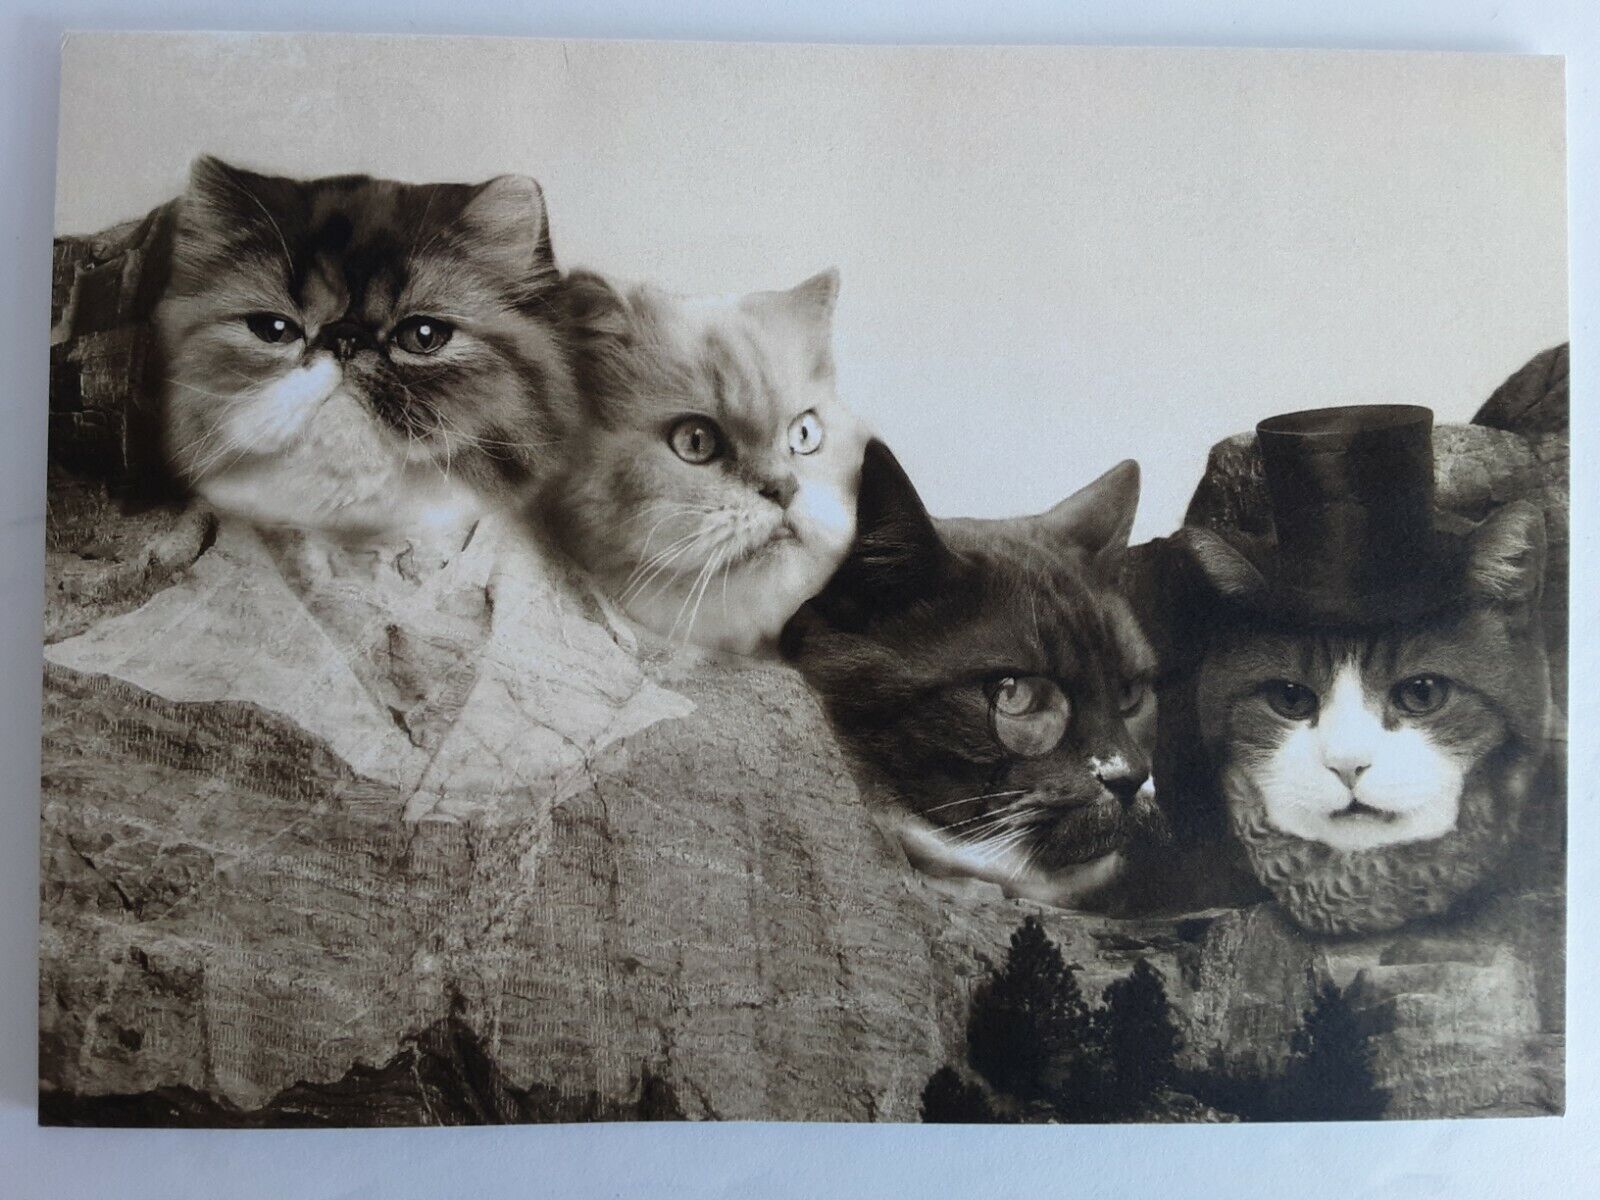 Vintage Cats Blank Greeting Cards Cats Mount Rushmore includes Envelope